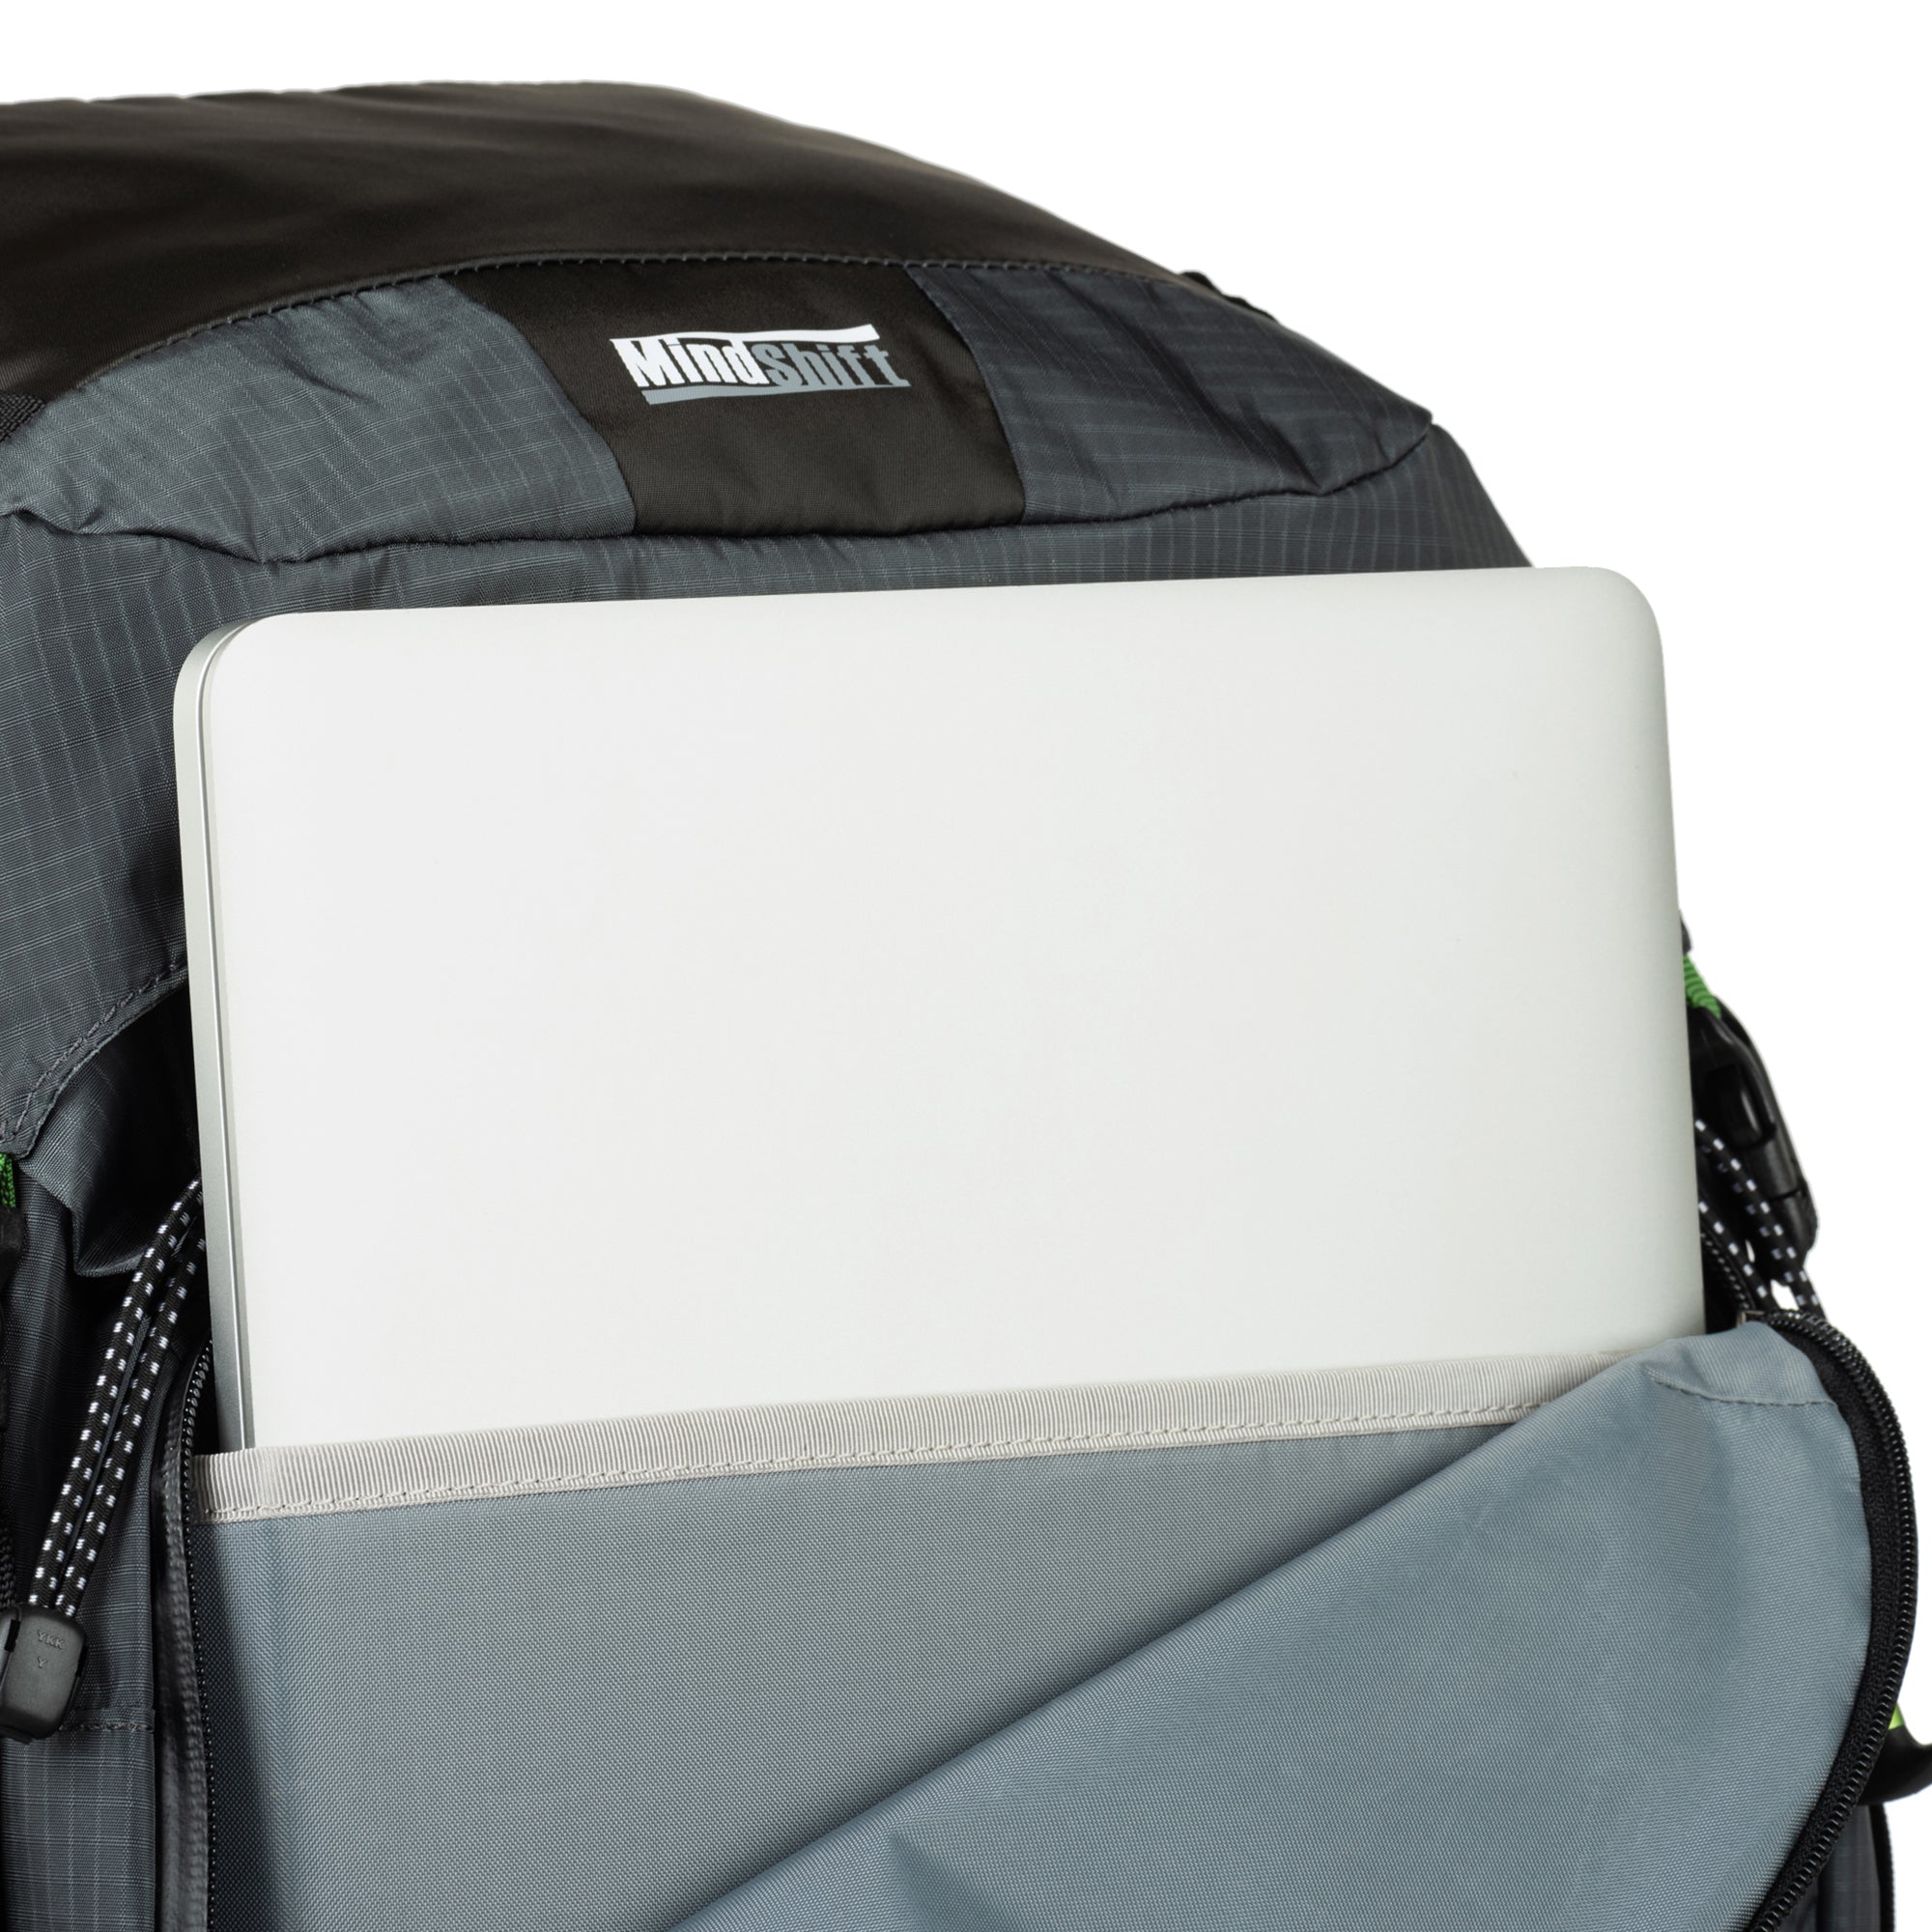 Dedicated padded sleeve fits up to a 16” laptop or a 3L reservoir in the front pocket